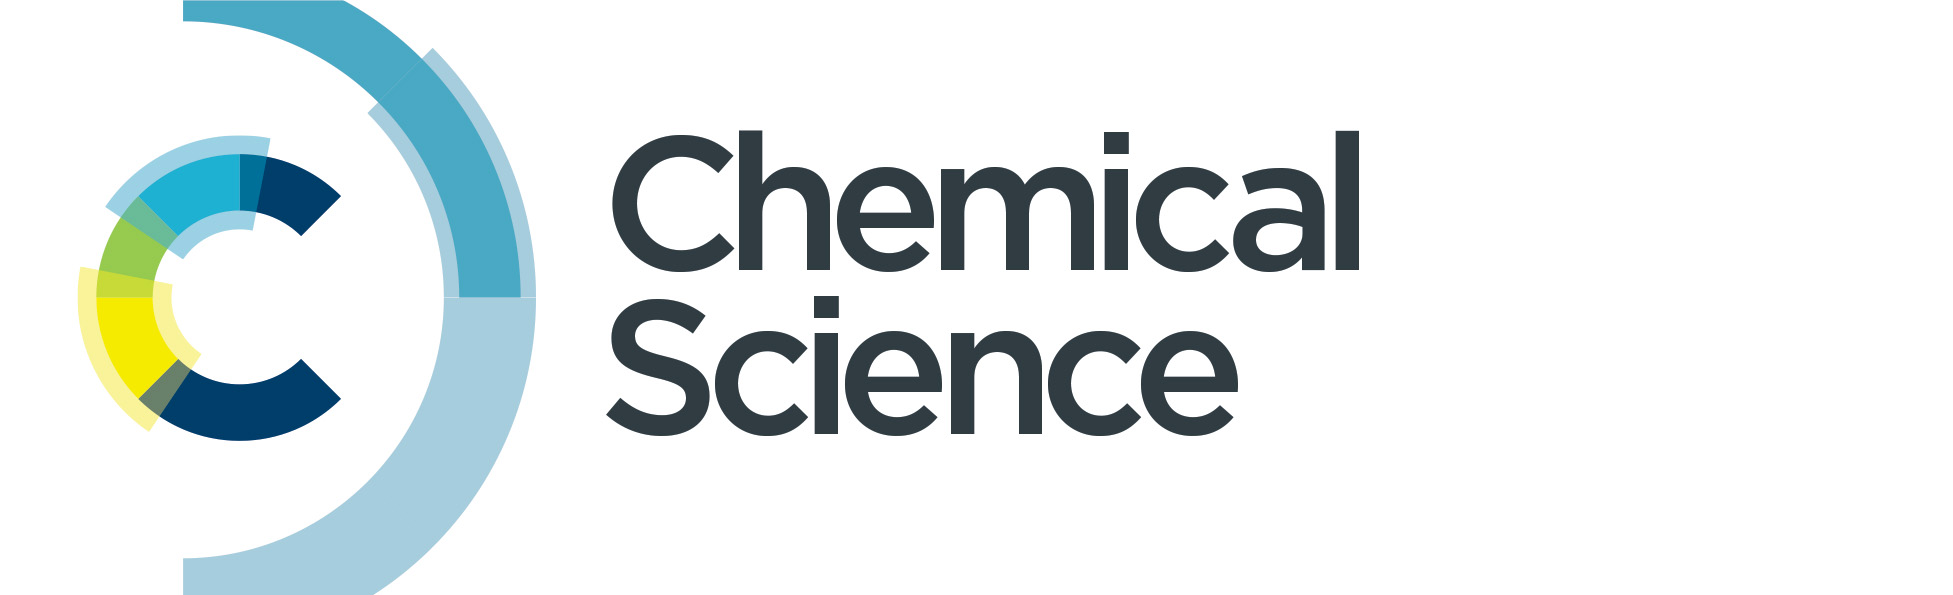 RSC Chemical Science